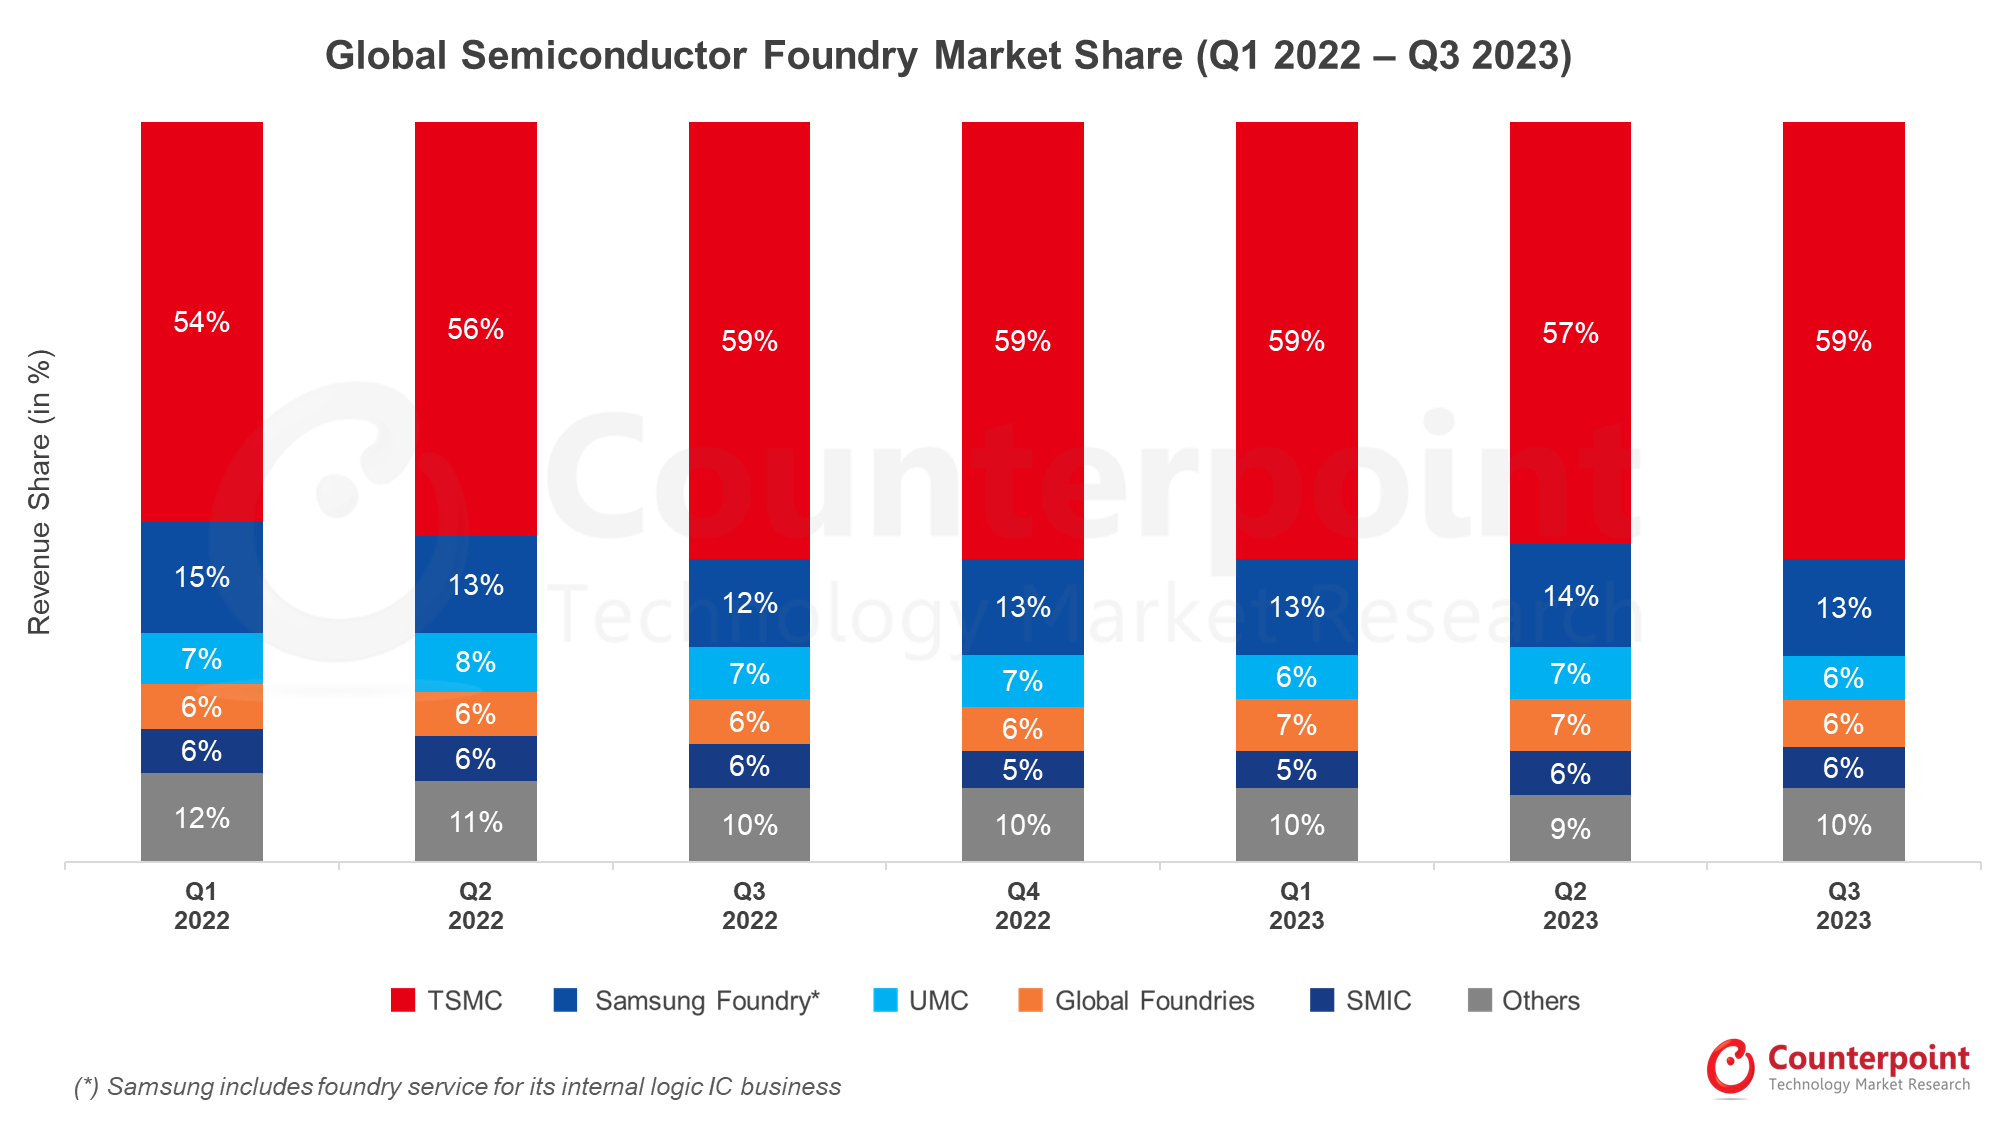 Global-Semiconductor-Foundry-Revenue-Share-Q3-2023